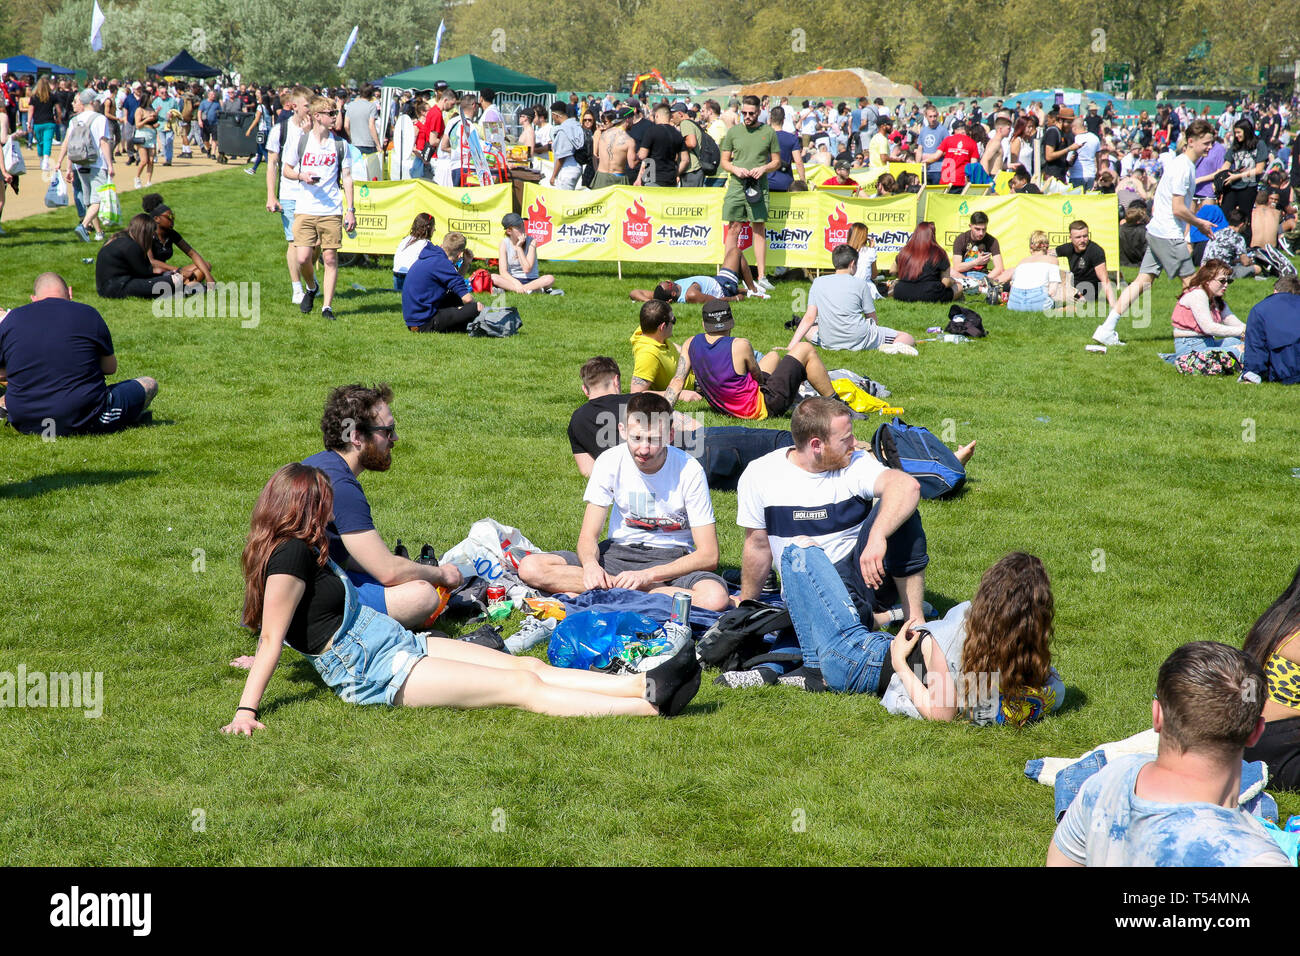 Hyde Park, London, UK 20 Apr 2019 - Tens of thousands of revellers gather to smoke cannabis in London’s Hyde Park without been arrested by the police as part of '4/20 Day', an unofficial International Weed Day event taking place on every year on 20 April. Attendees are calling on the Government to decriminalise Class B drug and raise awareness about the drug.  Credit: Dinendra Haria/Alamy Live News Stock Photo